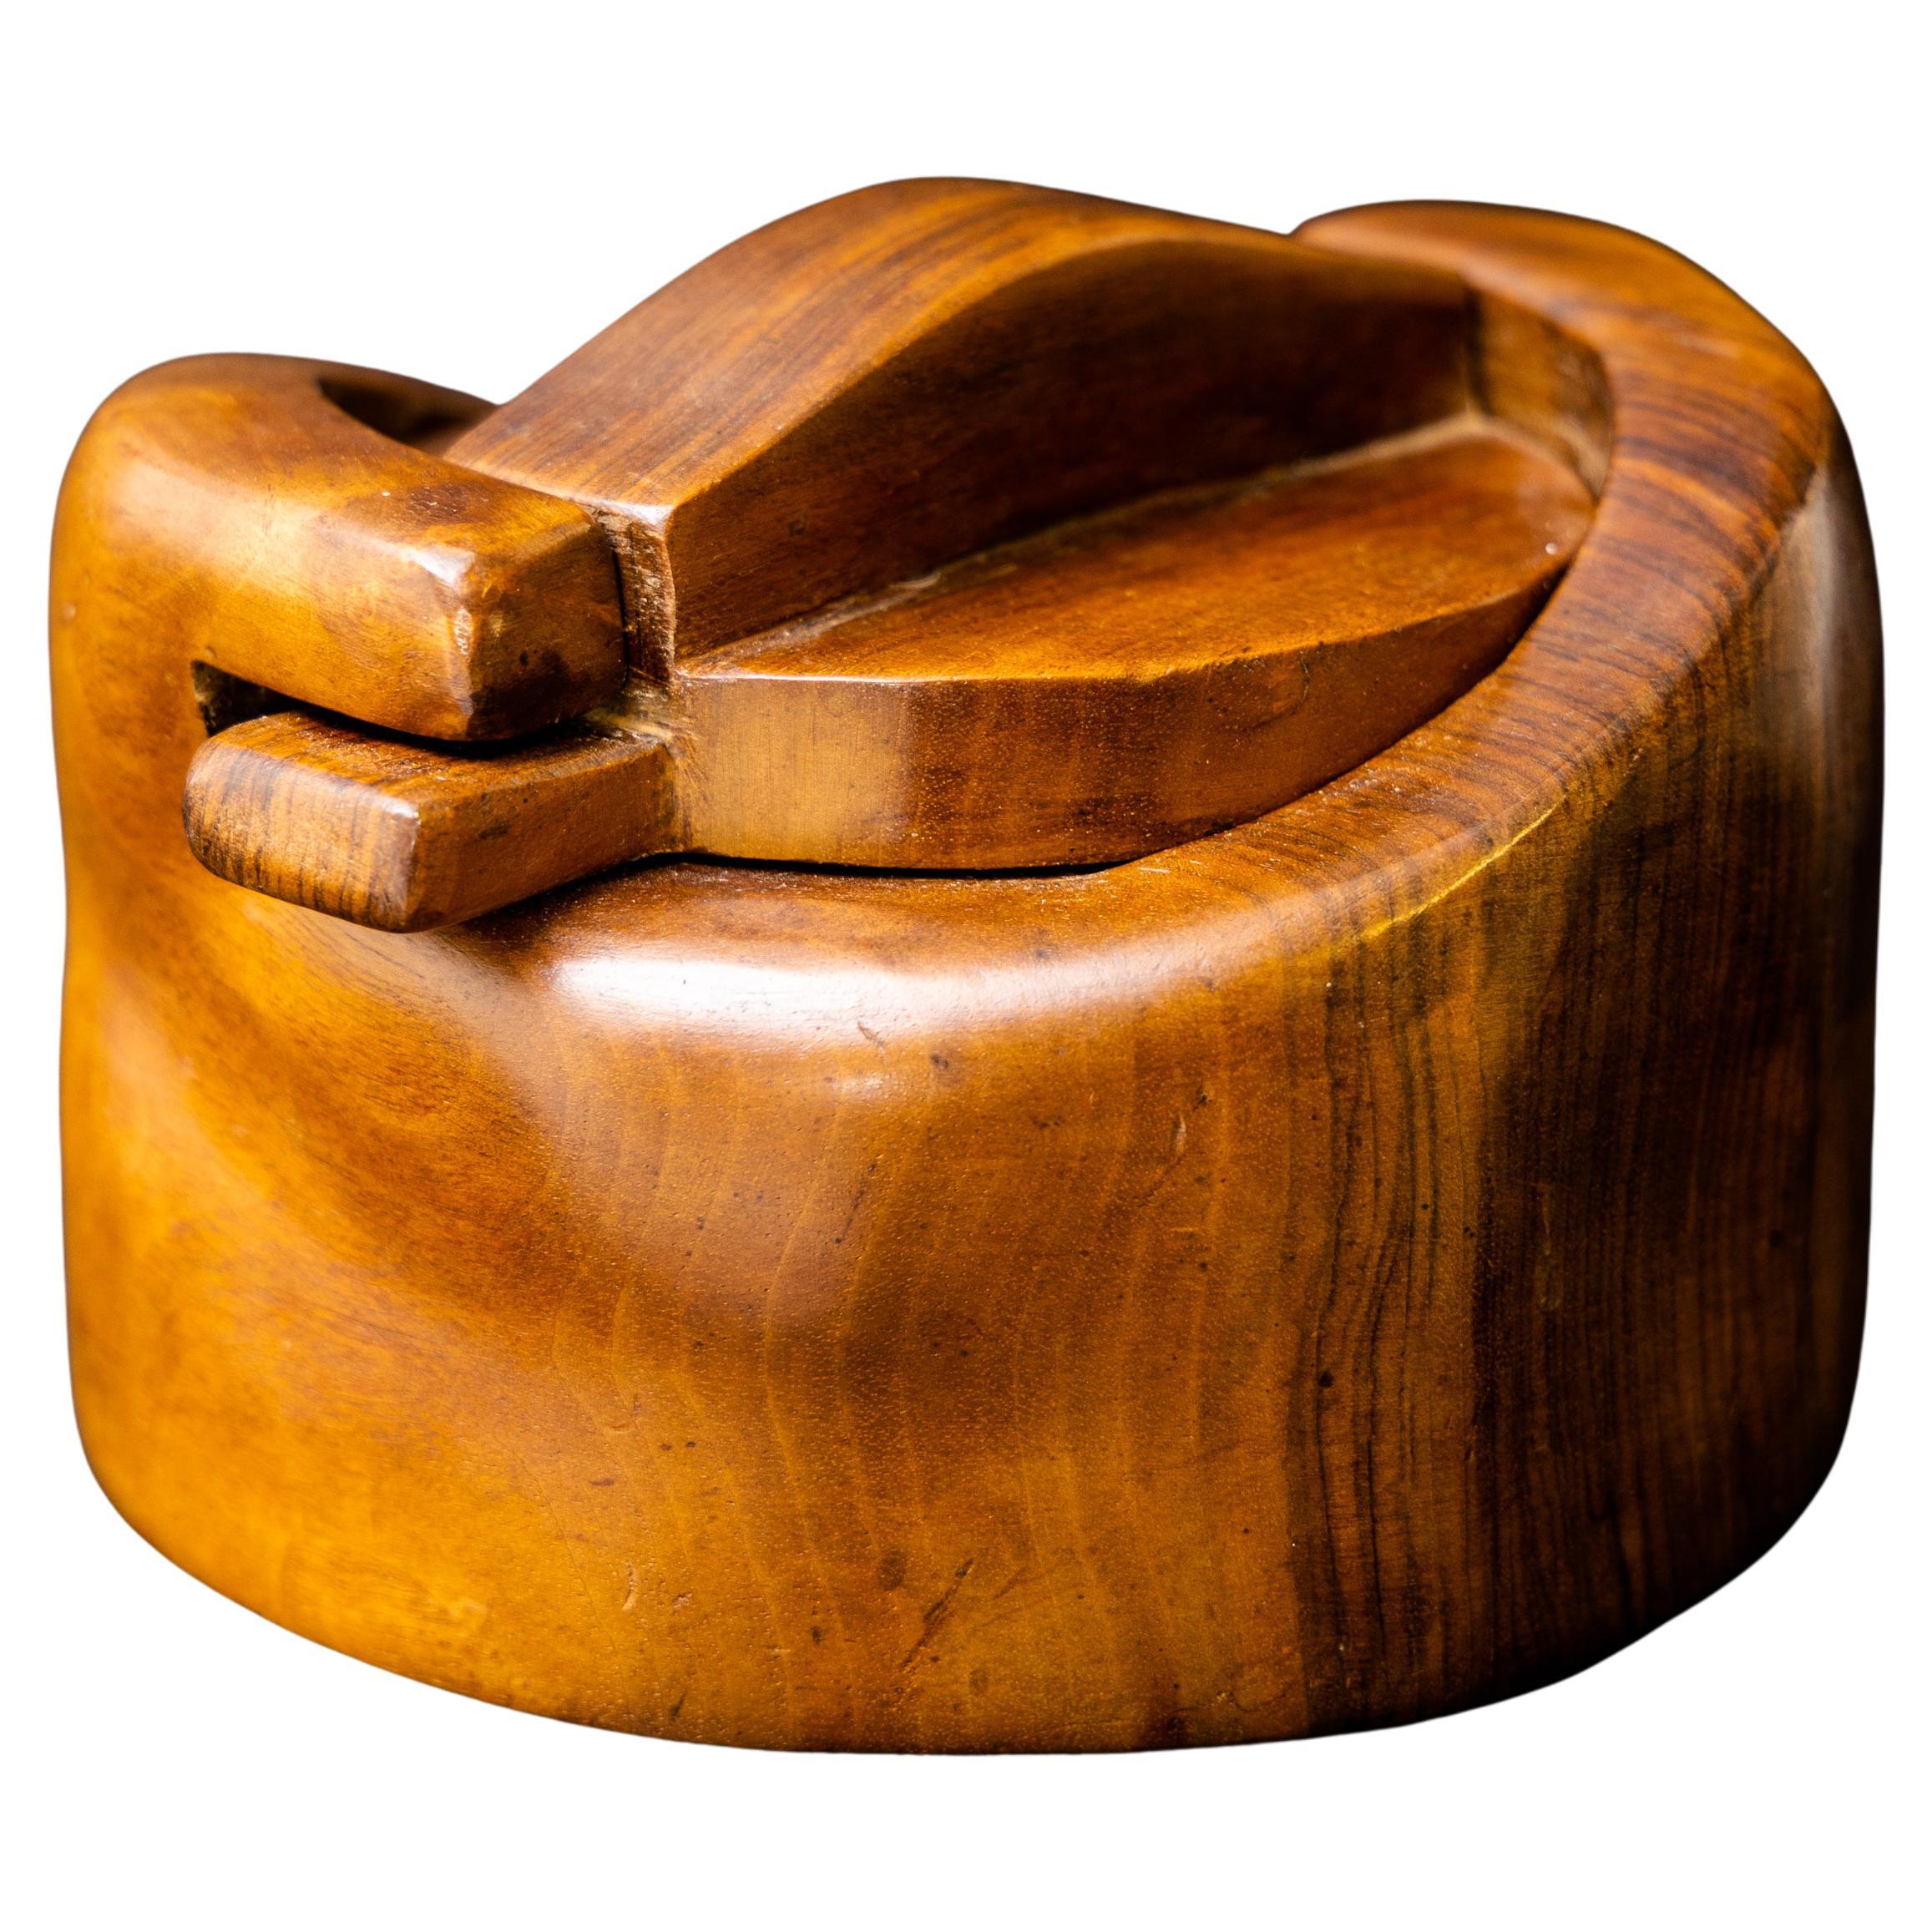 Lidded Box in Walnut by Alexandre Noll (1890-1970), France circa 1950 For Sale